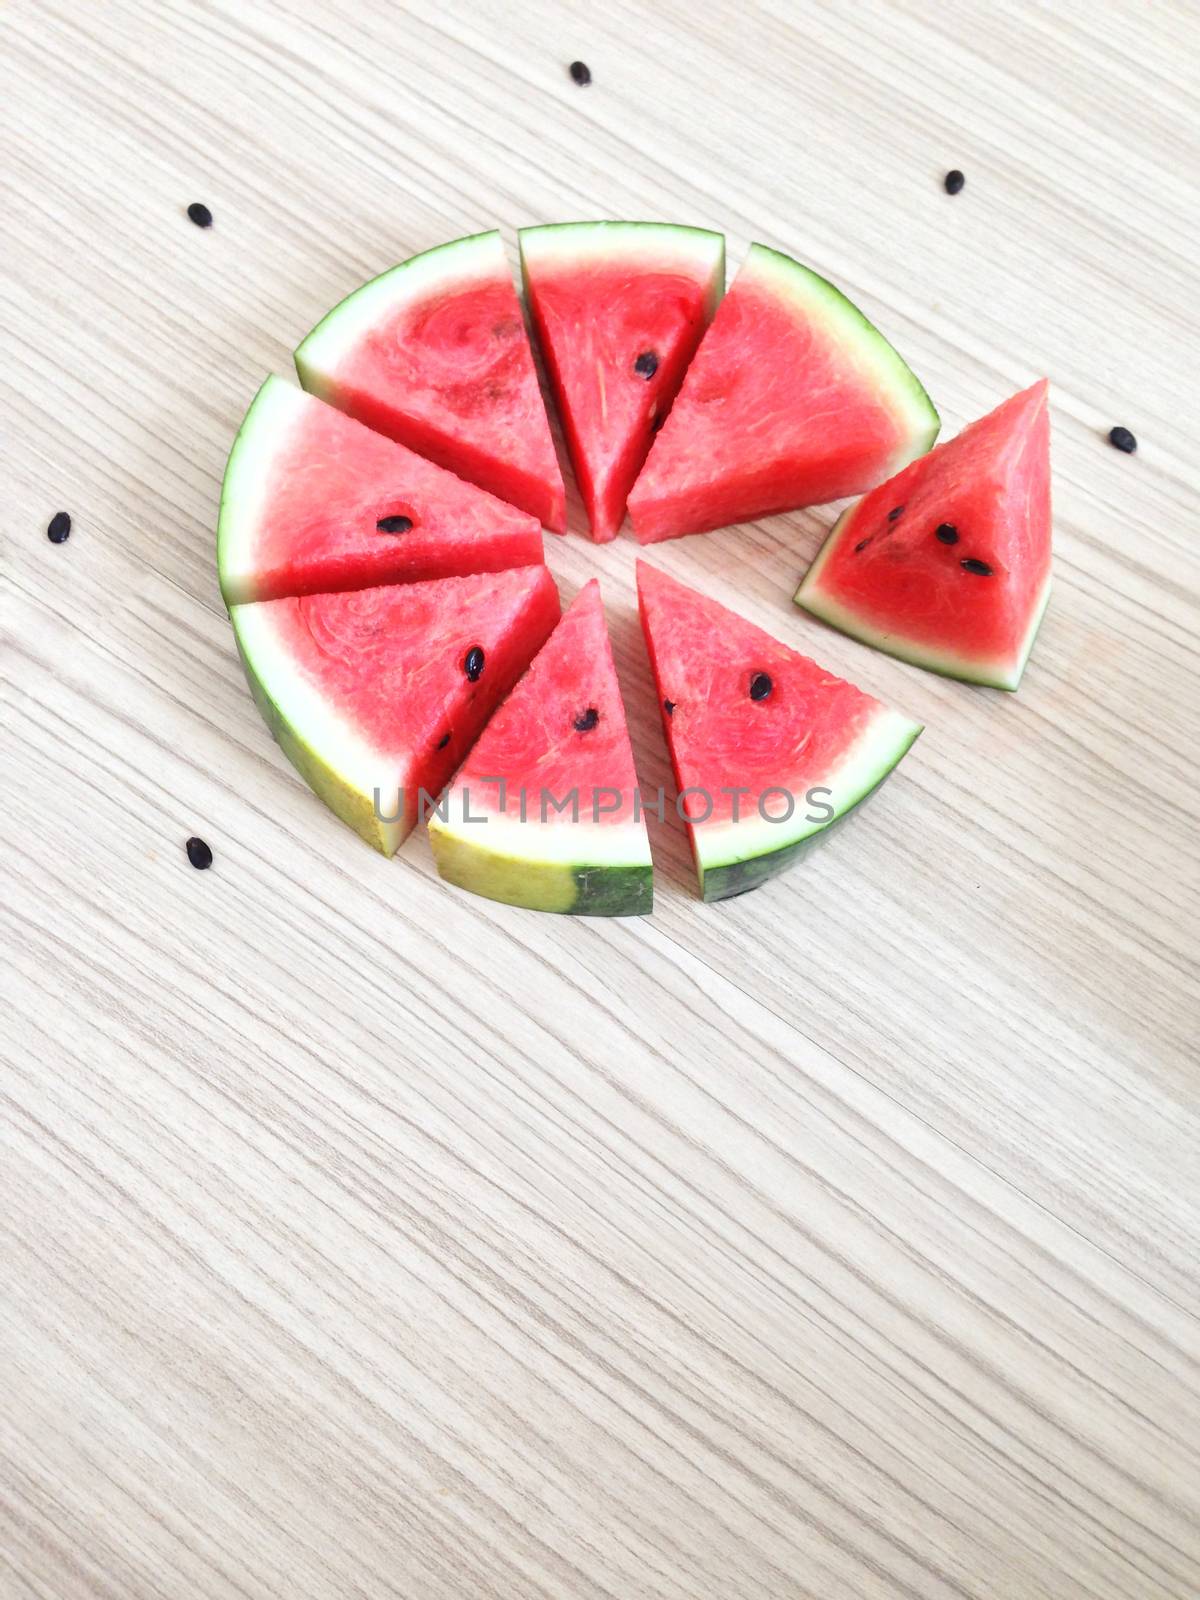 slices of watermelon look like cake on Wooden floor by Bowonpat